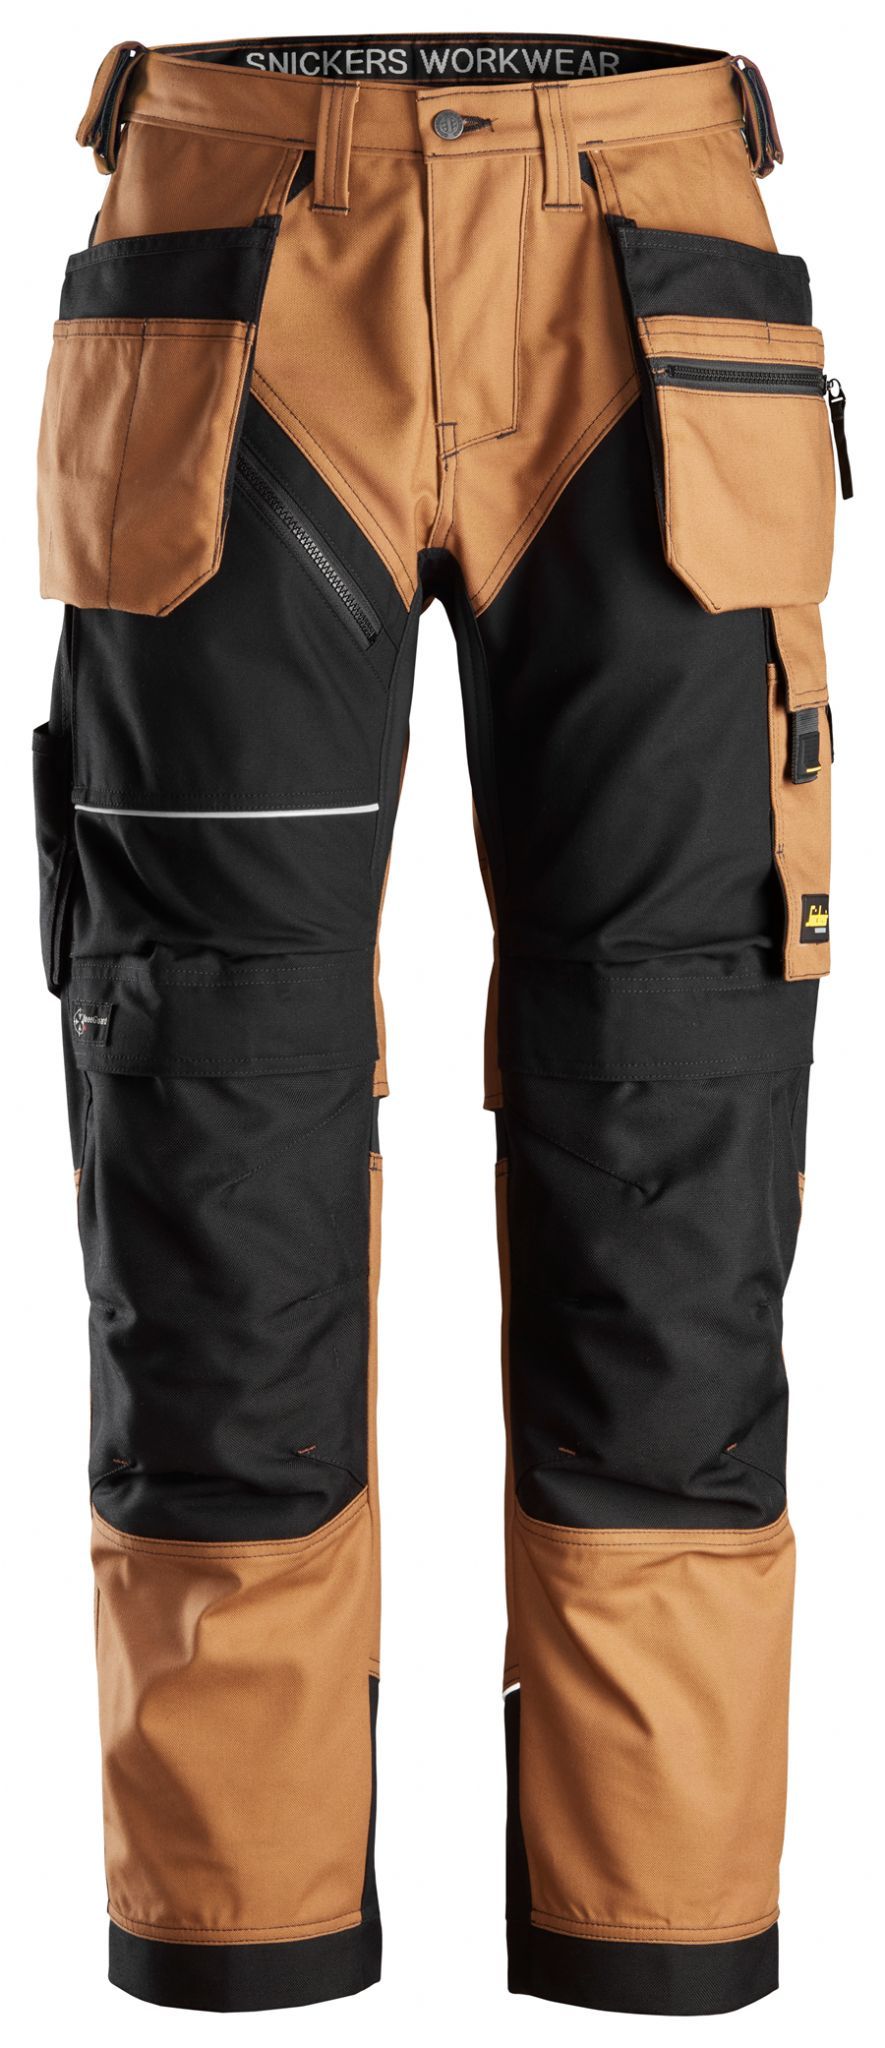 AllroundWork, Stretch Trousers without Knee Pockets | Snickers Workwear